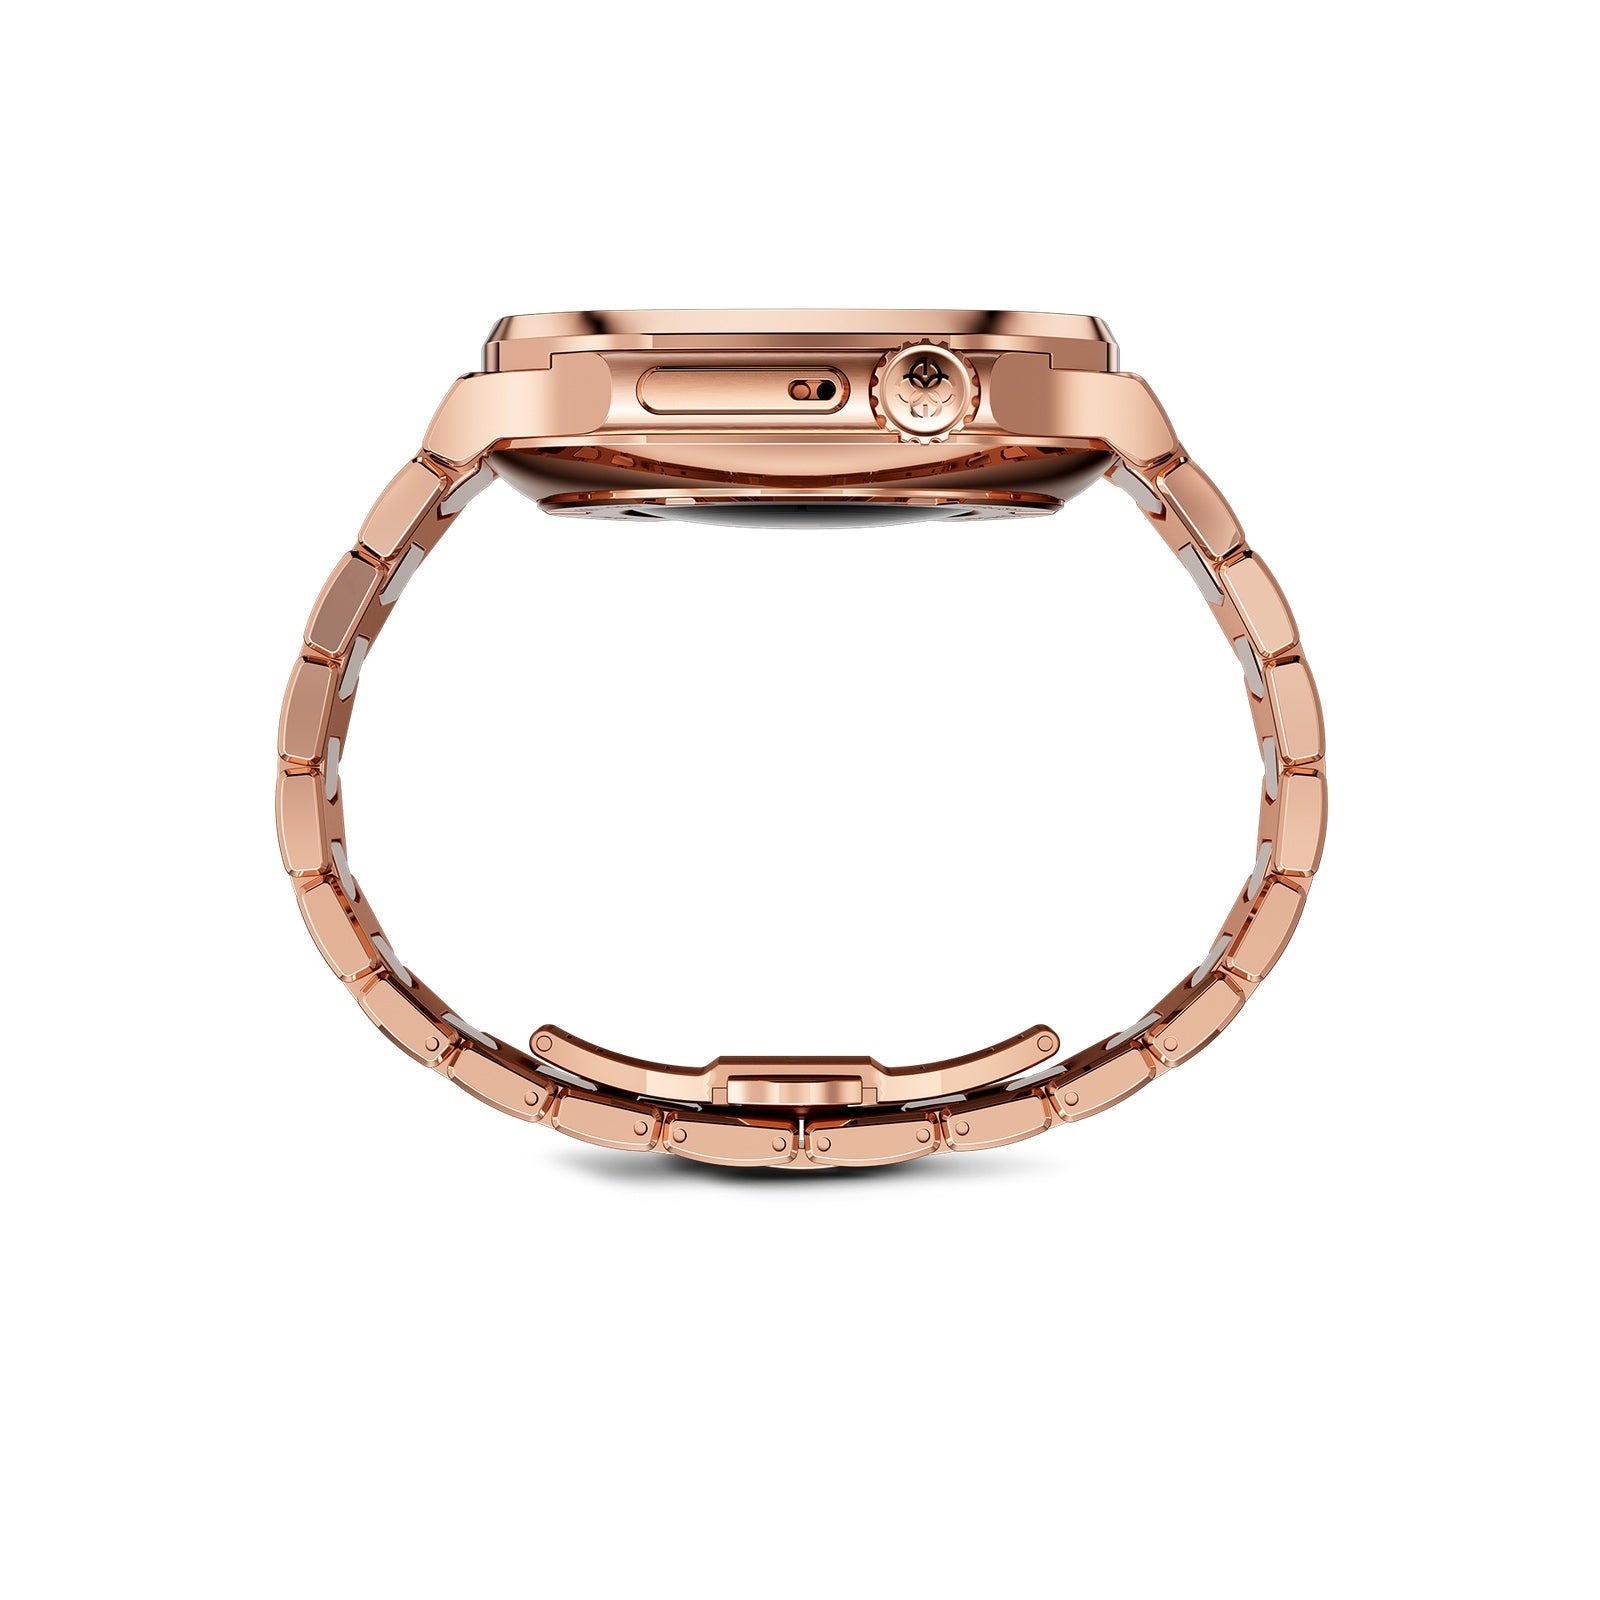 Apple Watch 7 - 9 Case - RO41 - Rose Gold MD